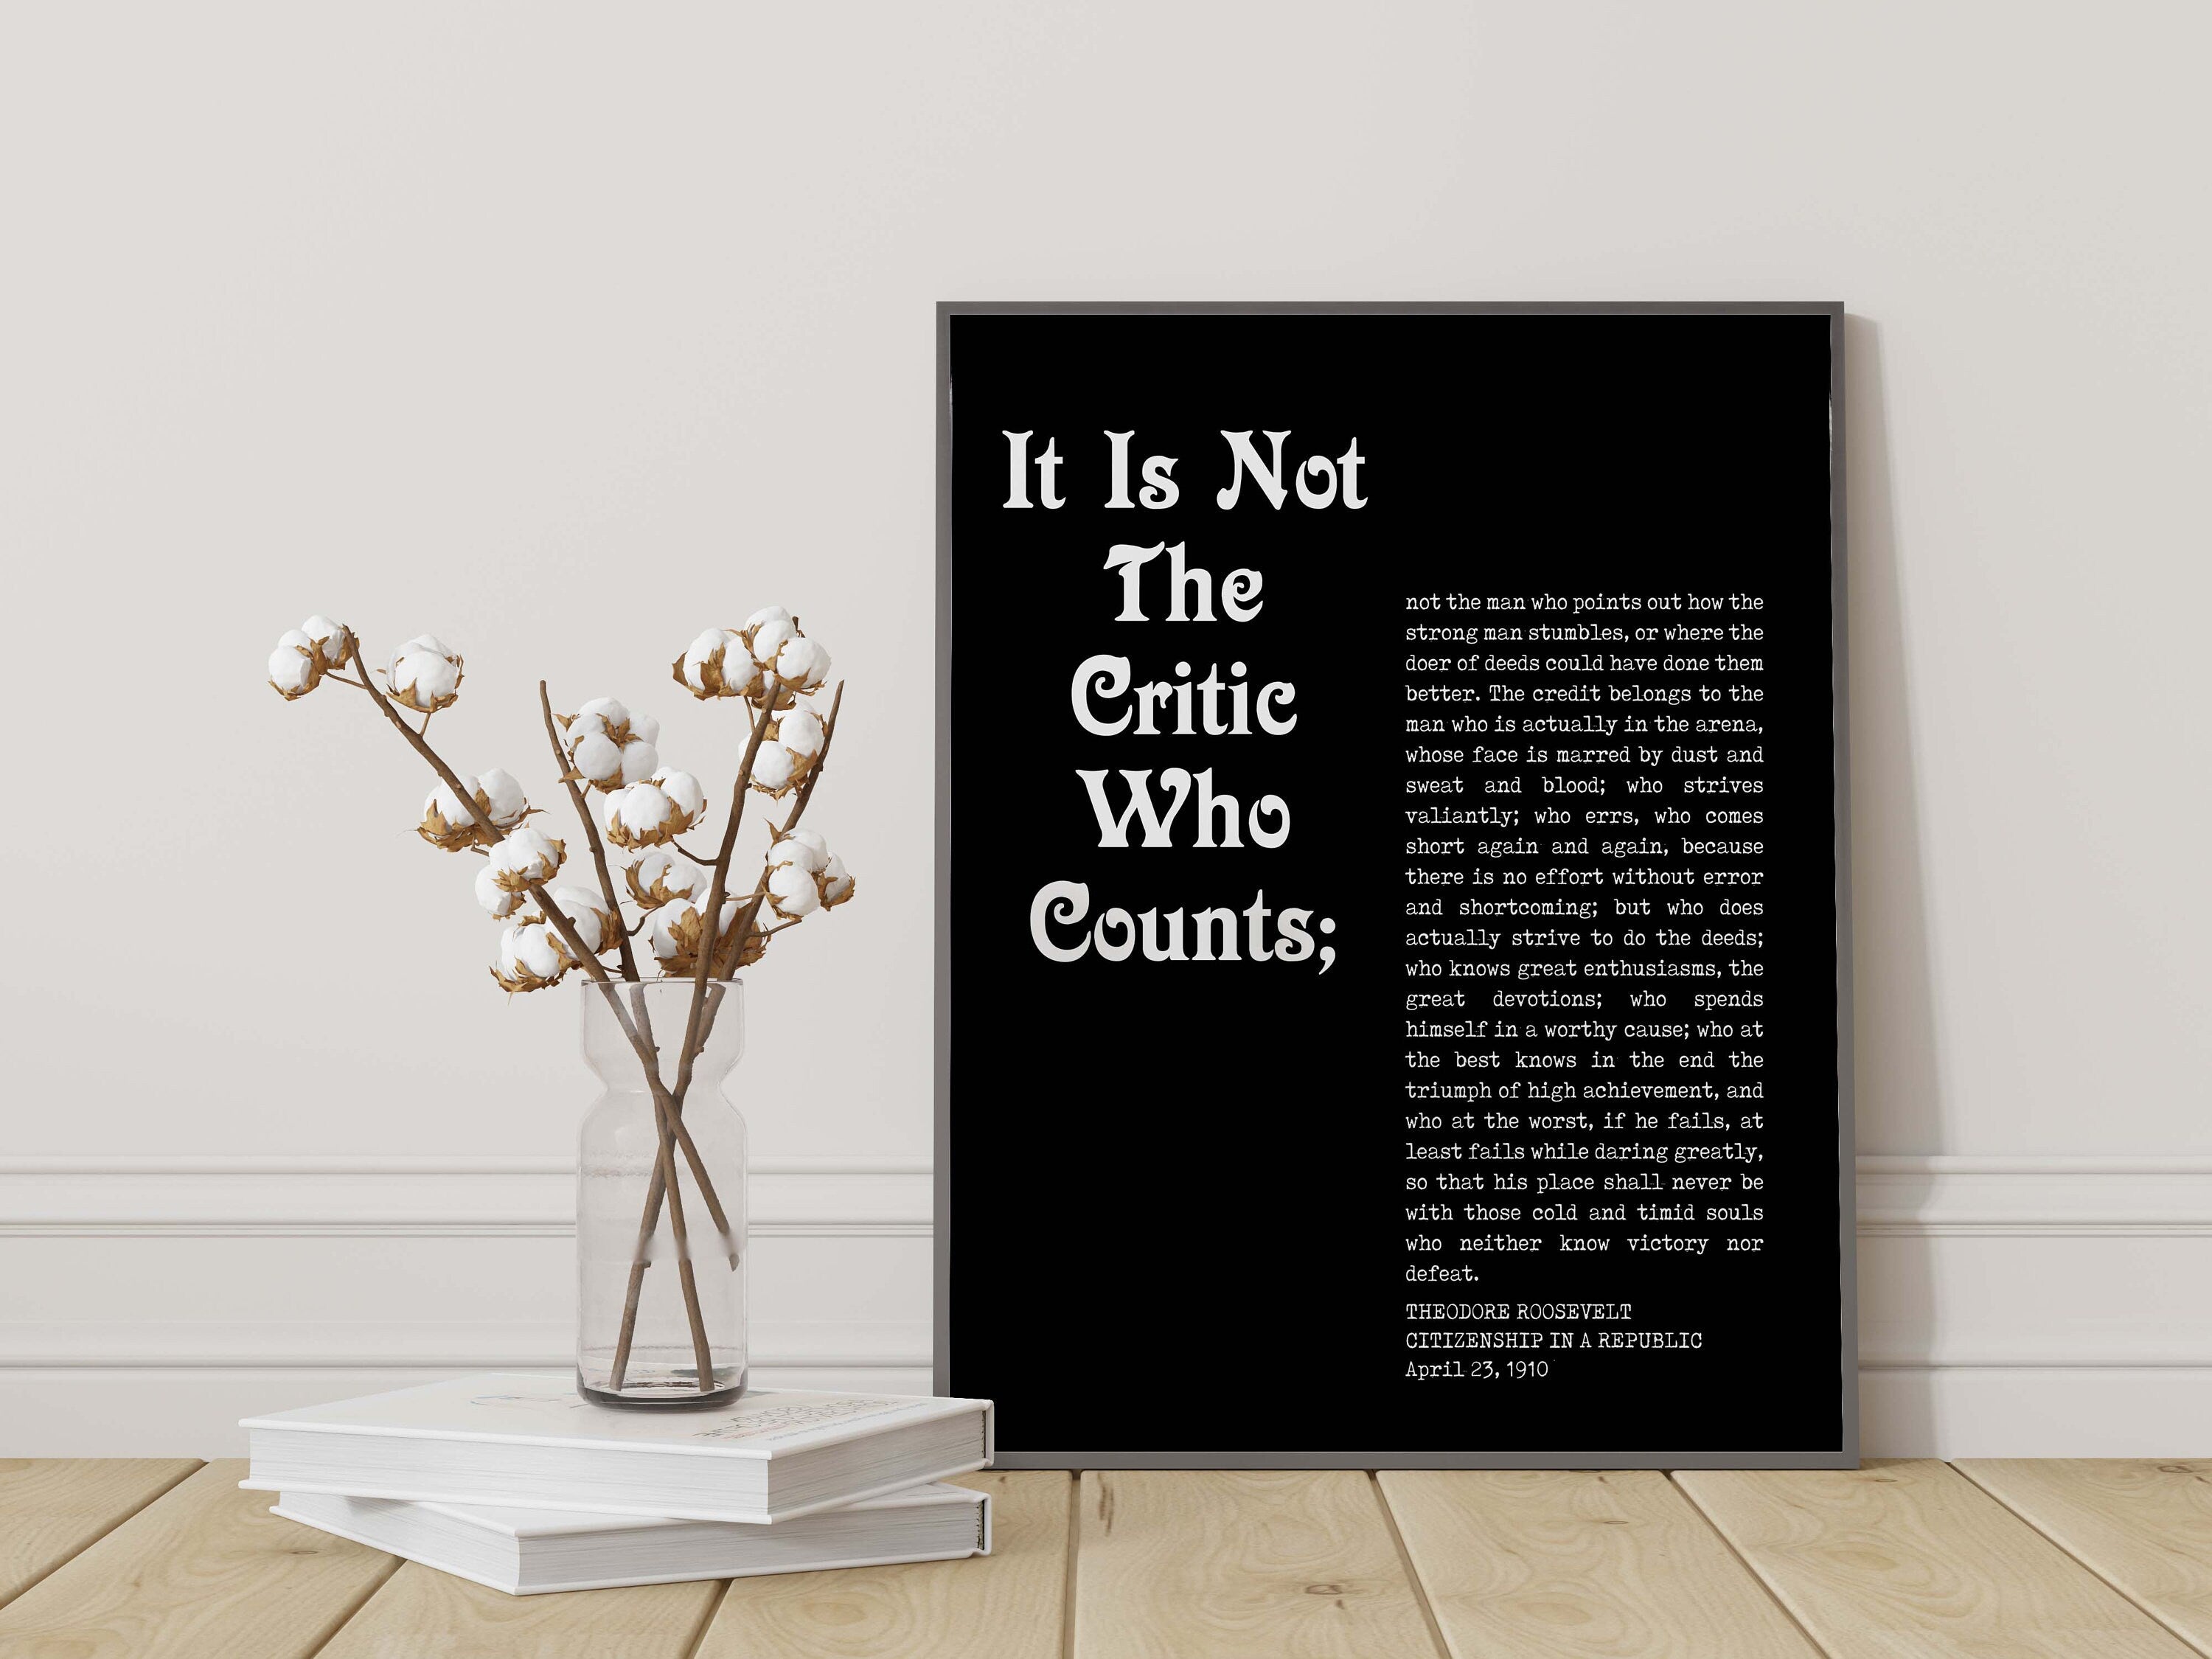 Daring Greatly Man In The Arena Theodore Roosevelt Office Wall Decor, Inspirational Quotes Unframed Wall Art In Black And White